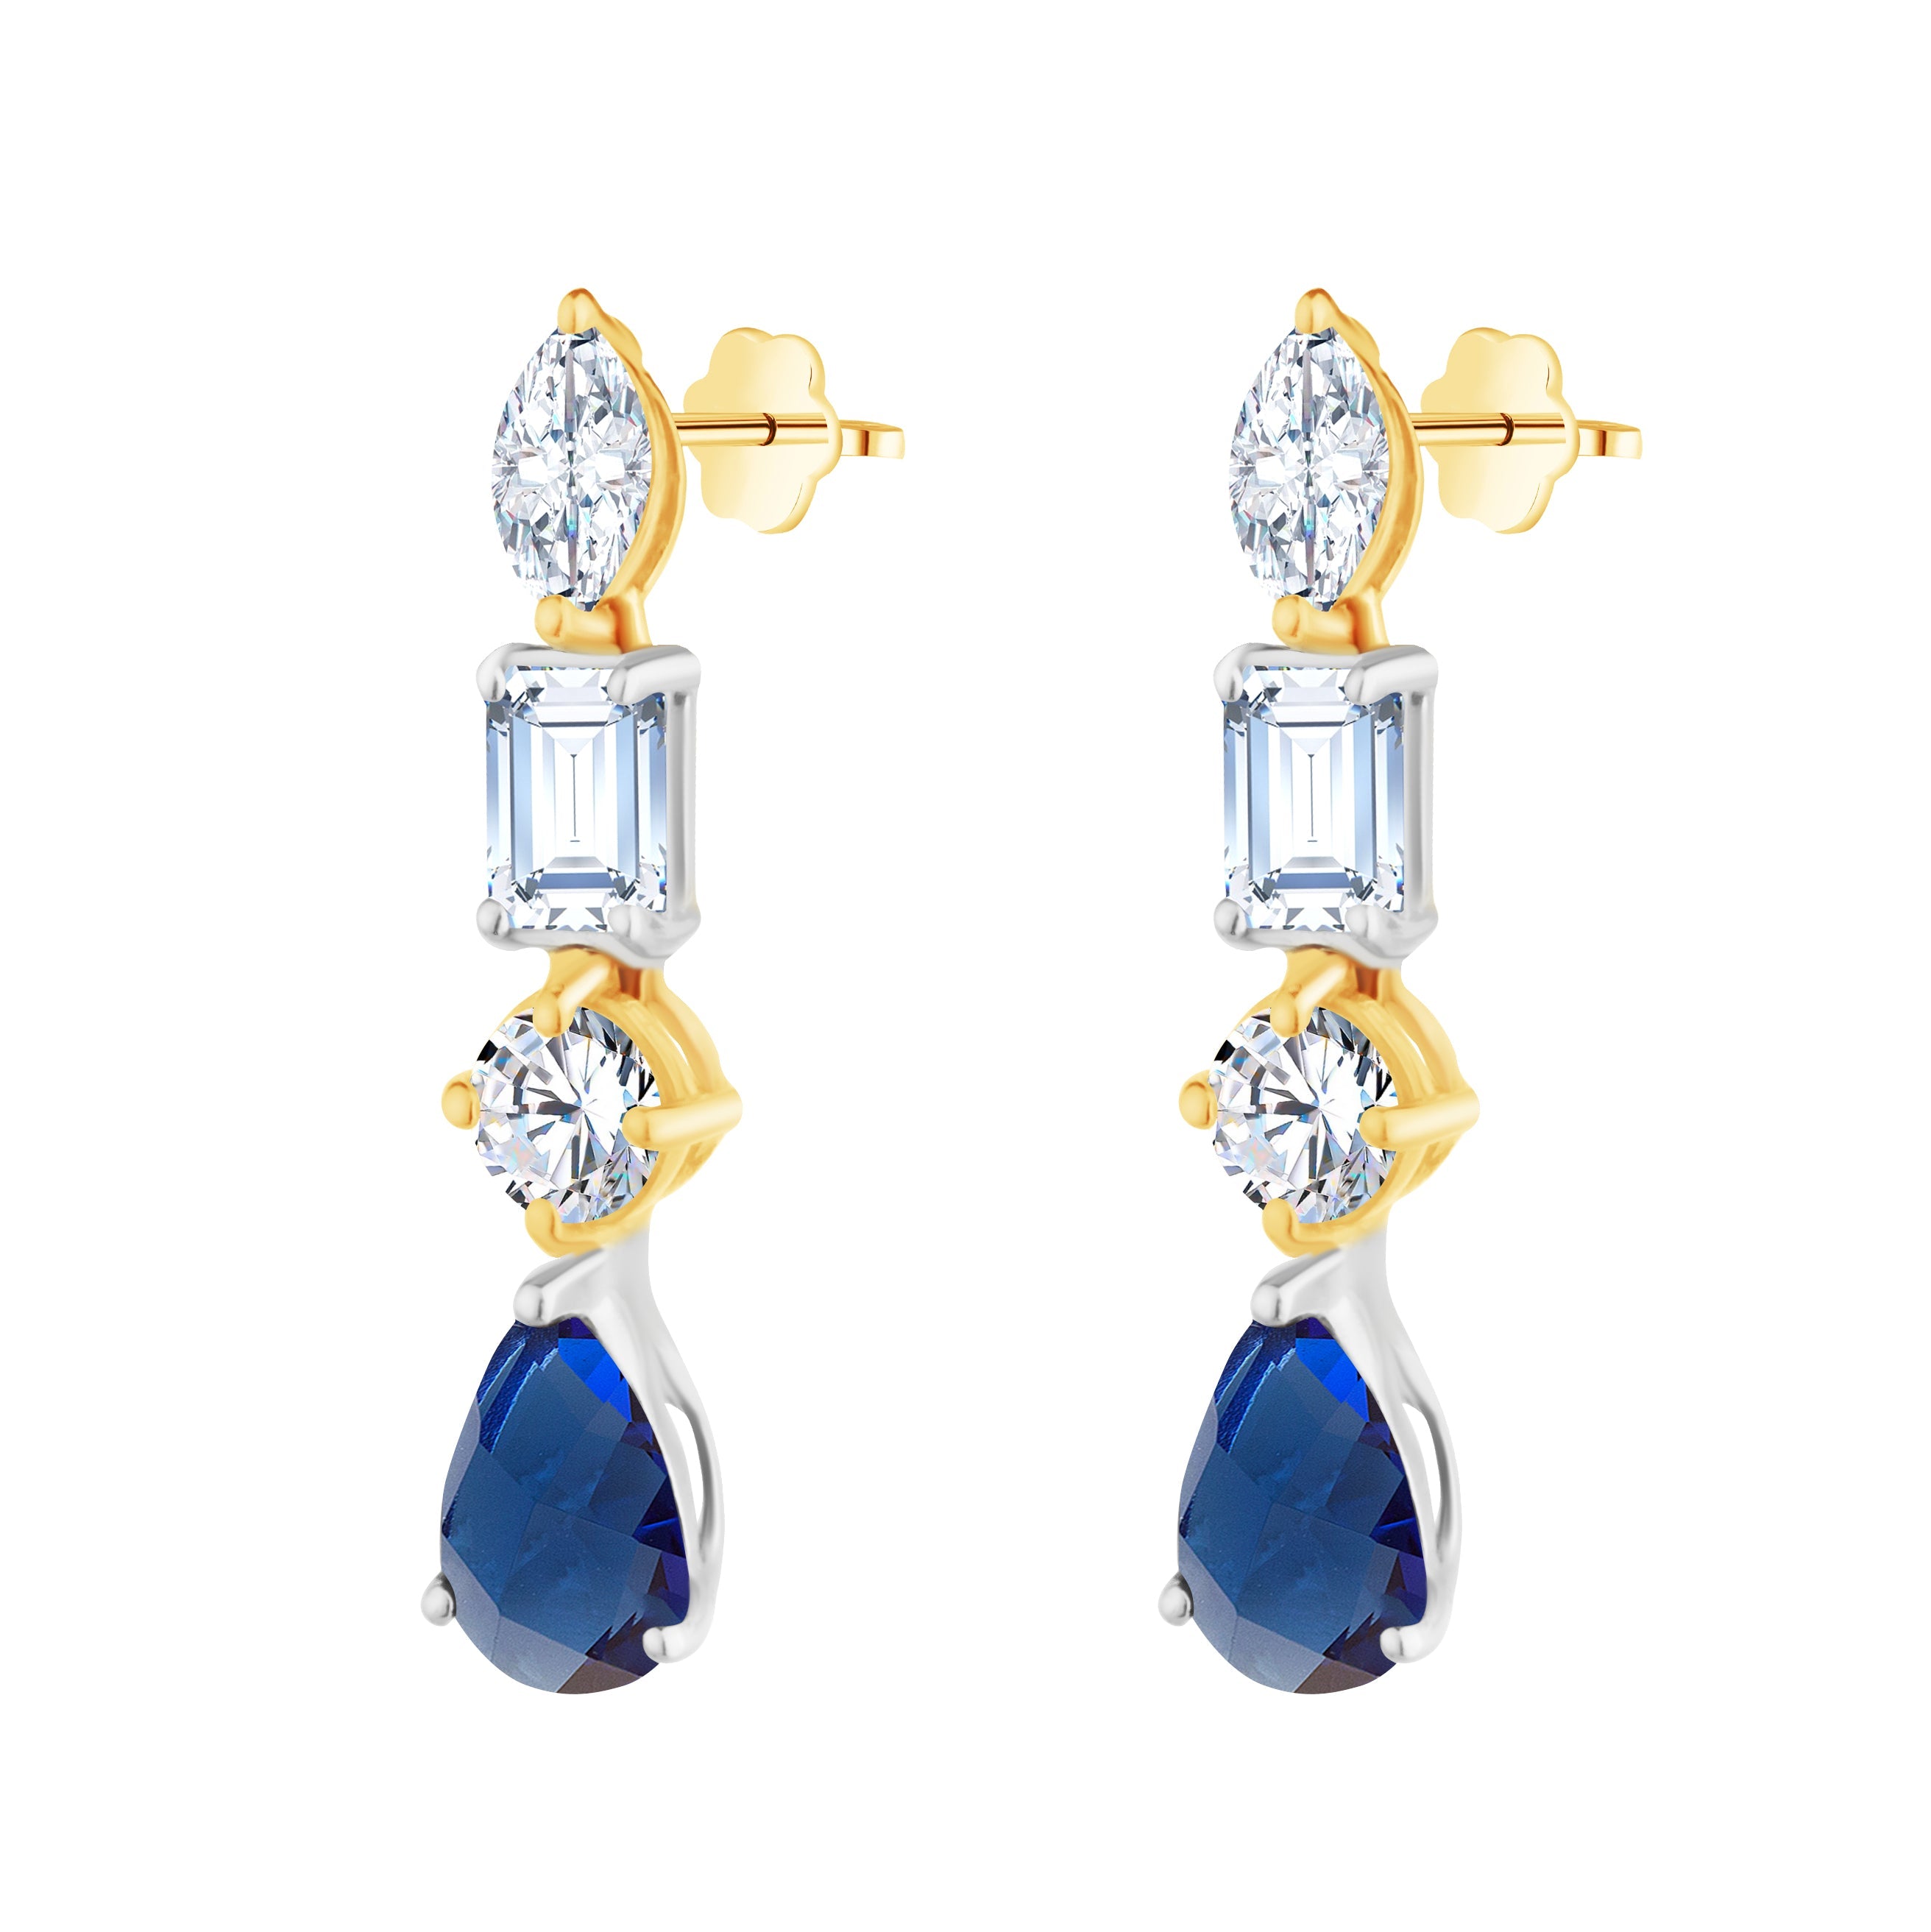 diamond Earring with a Dangling sapphire stone in 18K White & Yellow gold - I-X030E